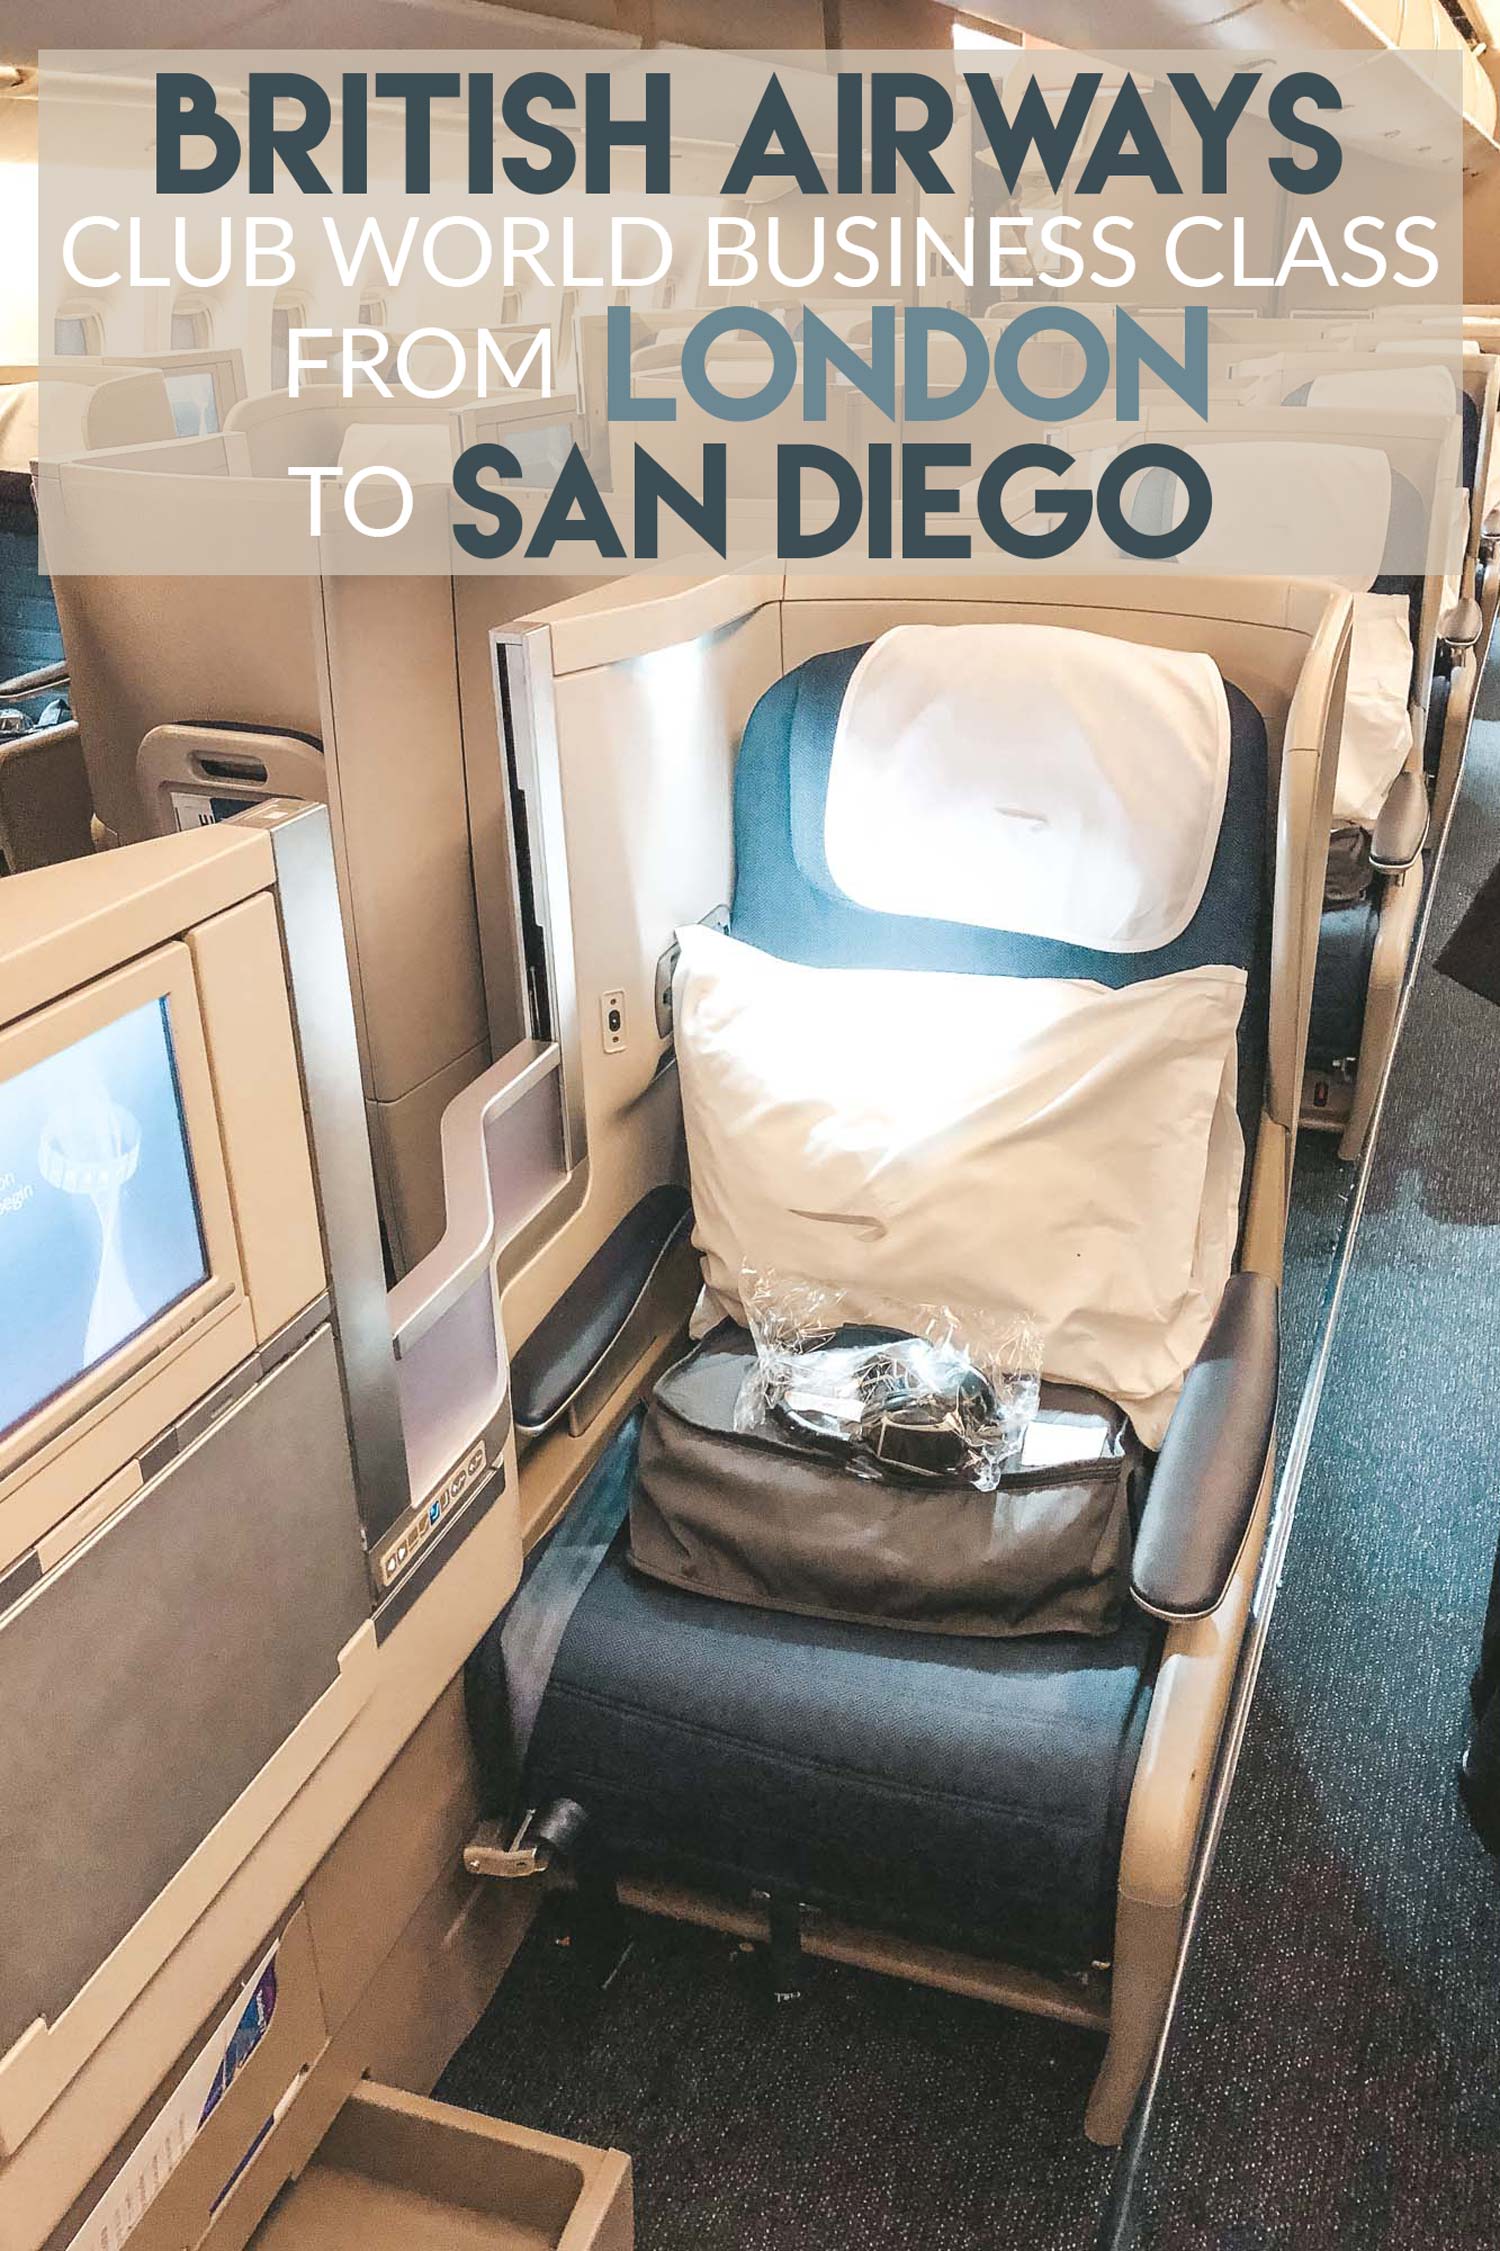 British Airways Club World Business Class from London to San Diego